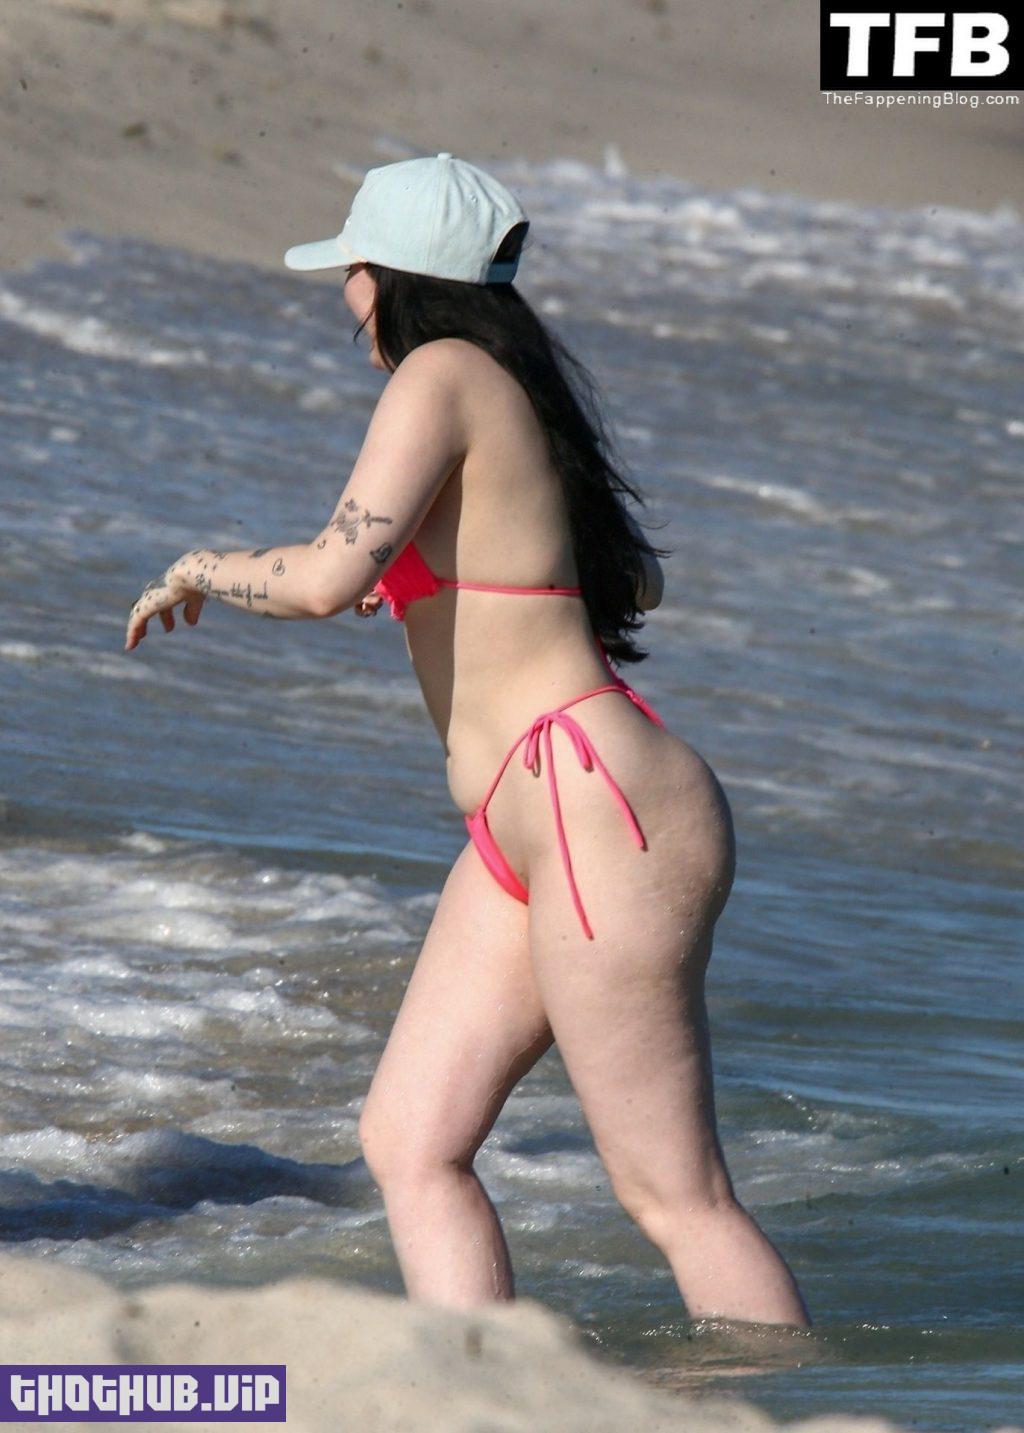 Sexy Noah Cyrus Enjoys A Sunny Day With Family And Friends In Miami Beach (37 Photos) On Thothub